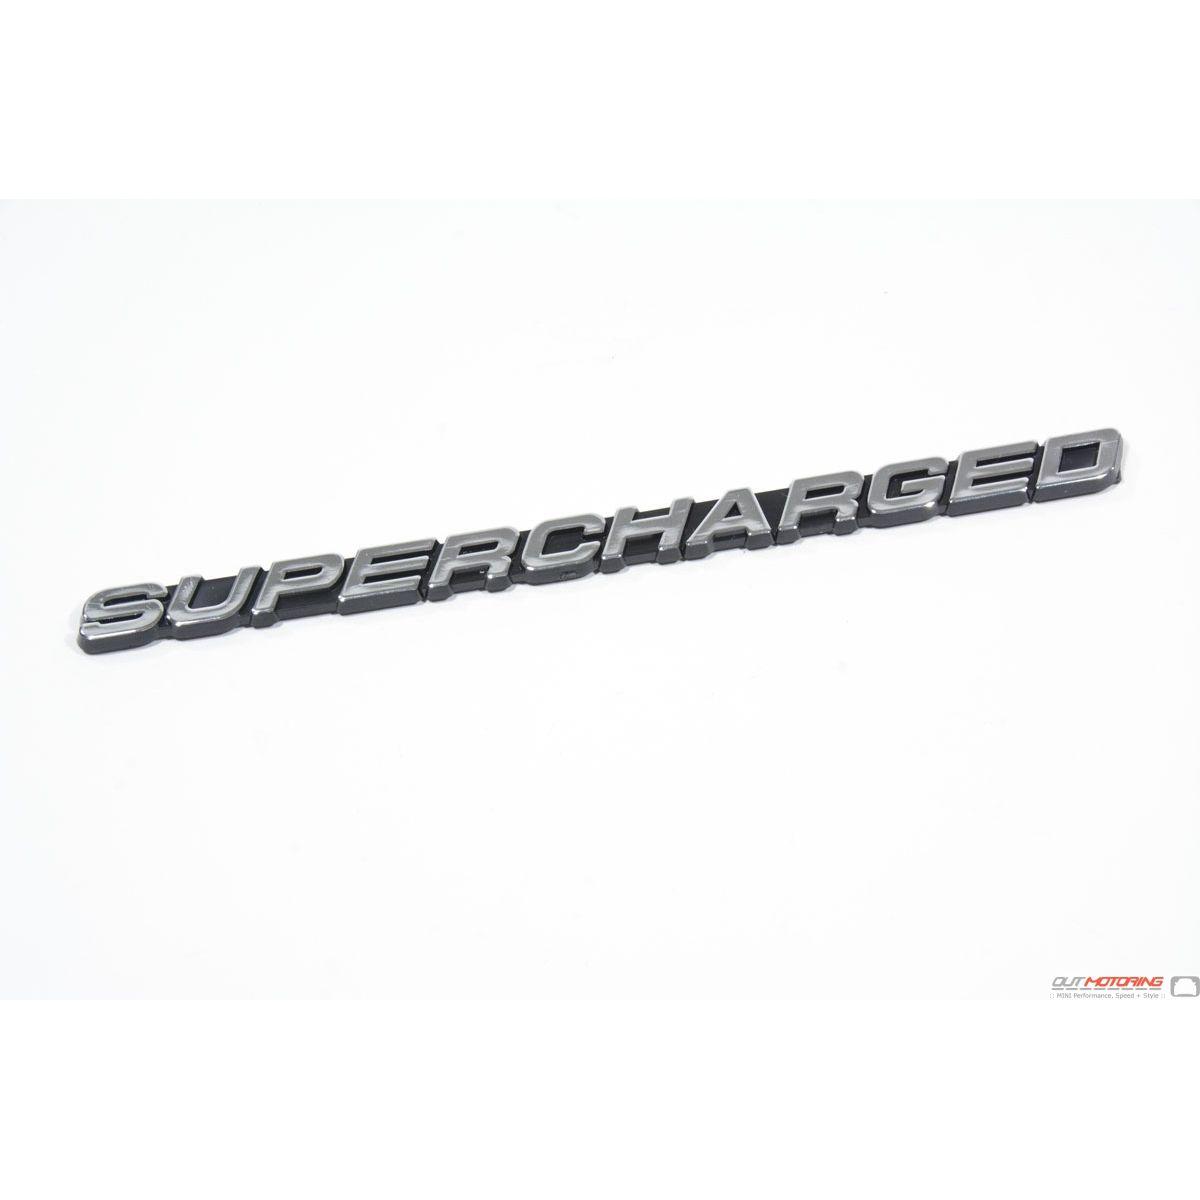 Supercharged Logo - MINI Cooper SUPERCHARGED Badge: 5.5